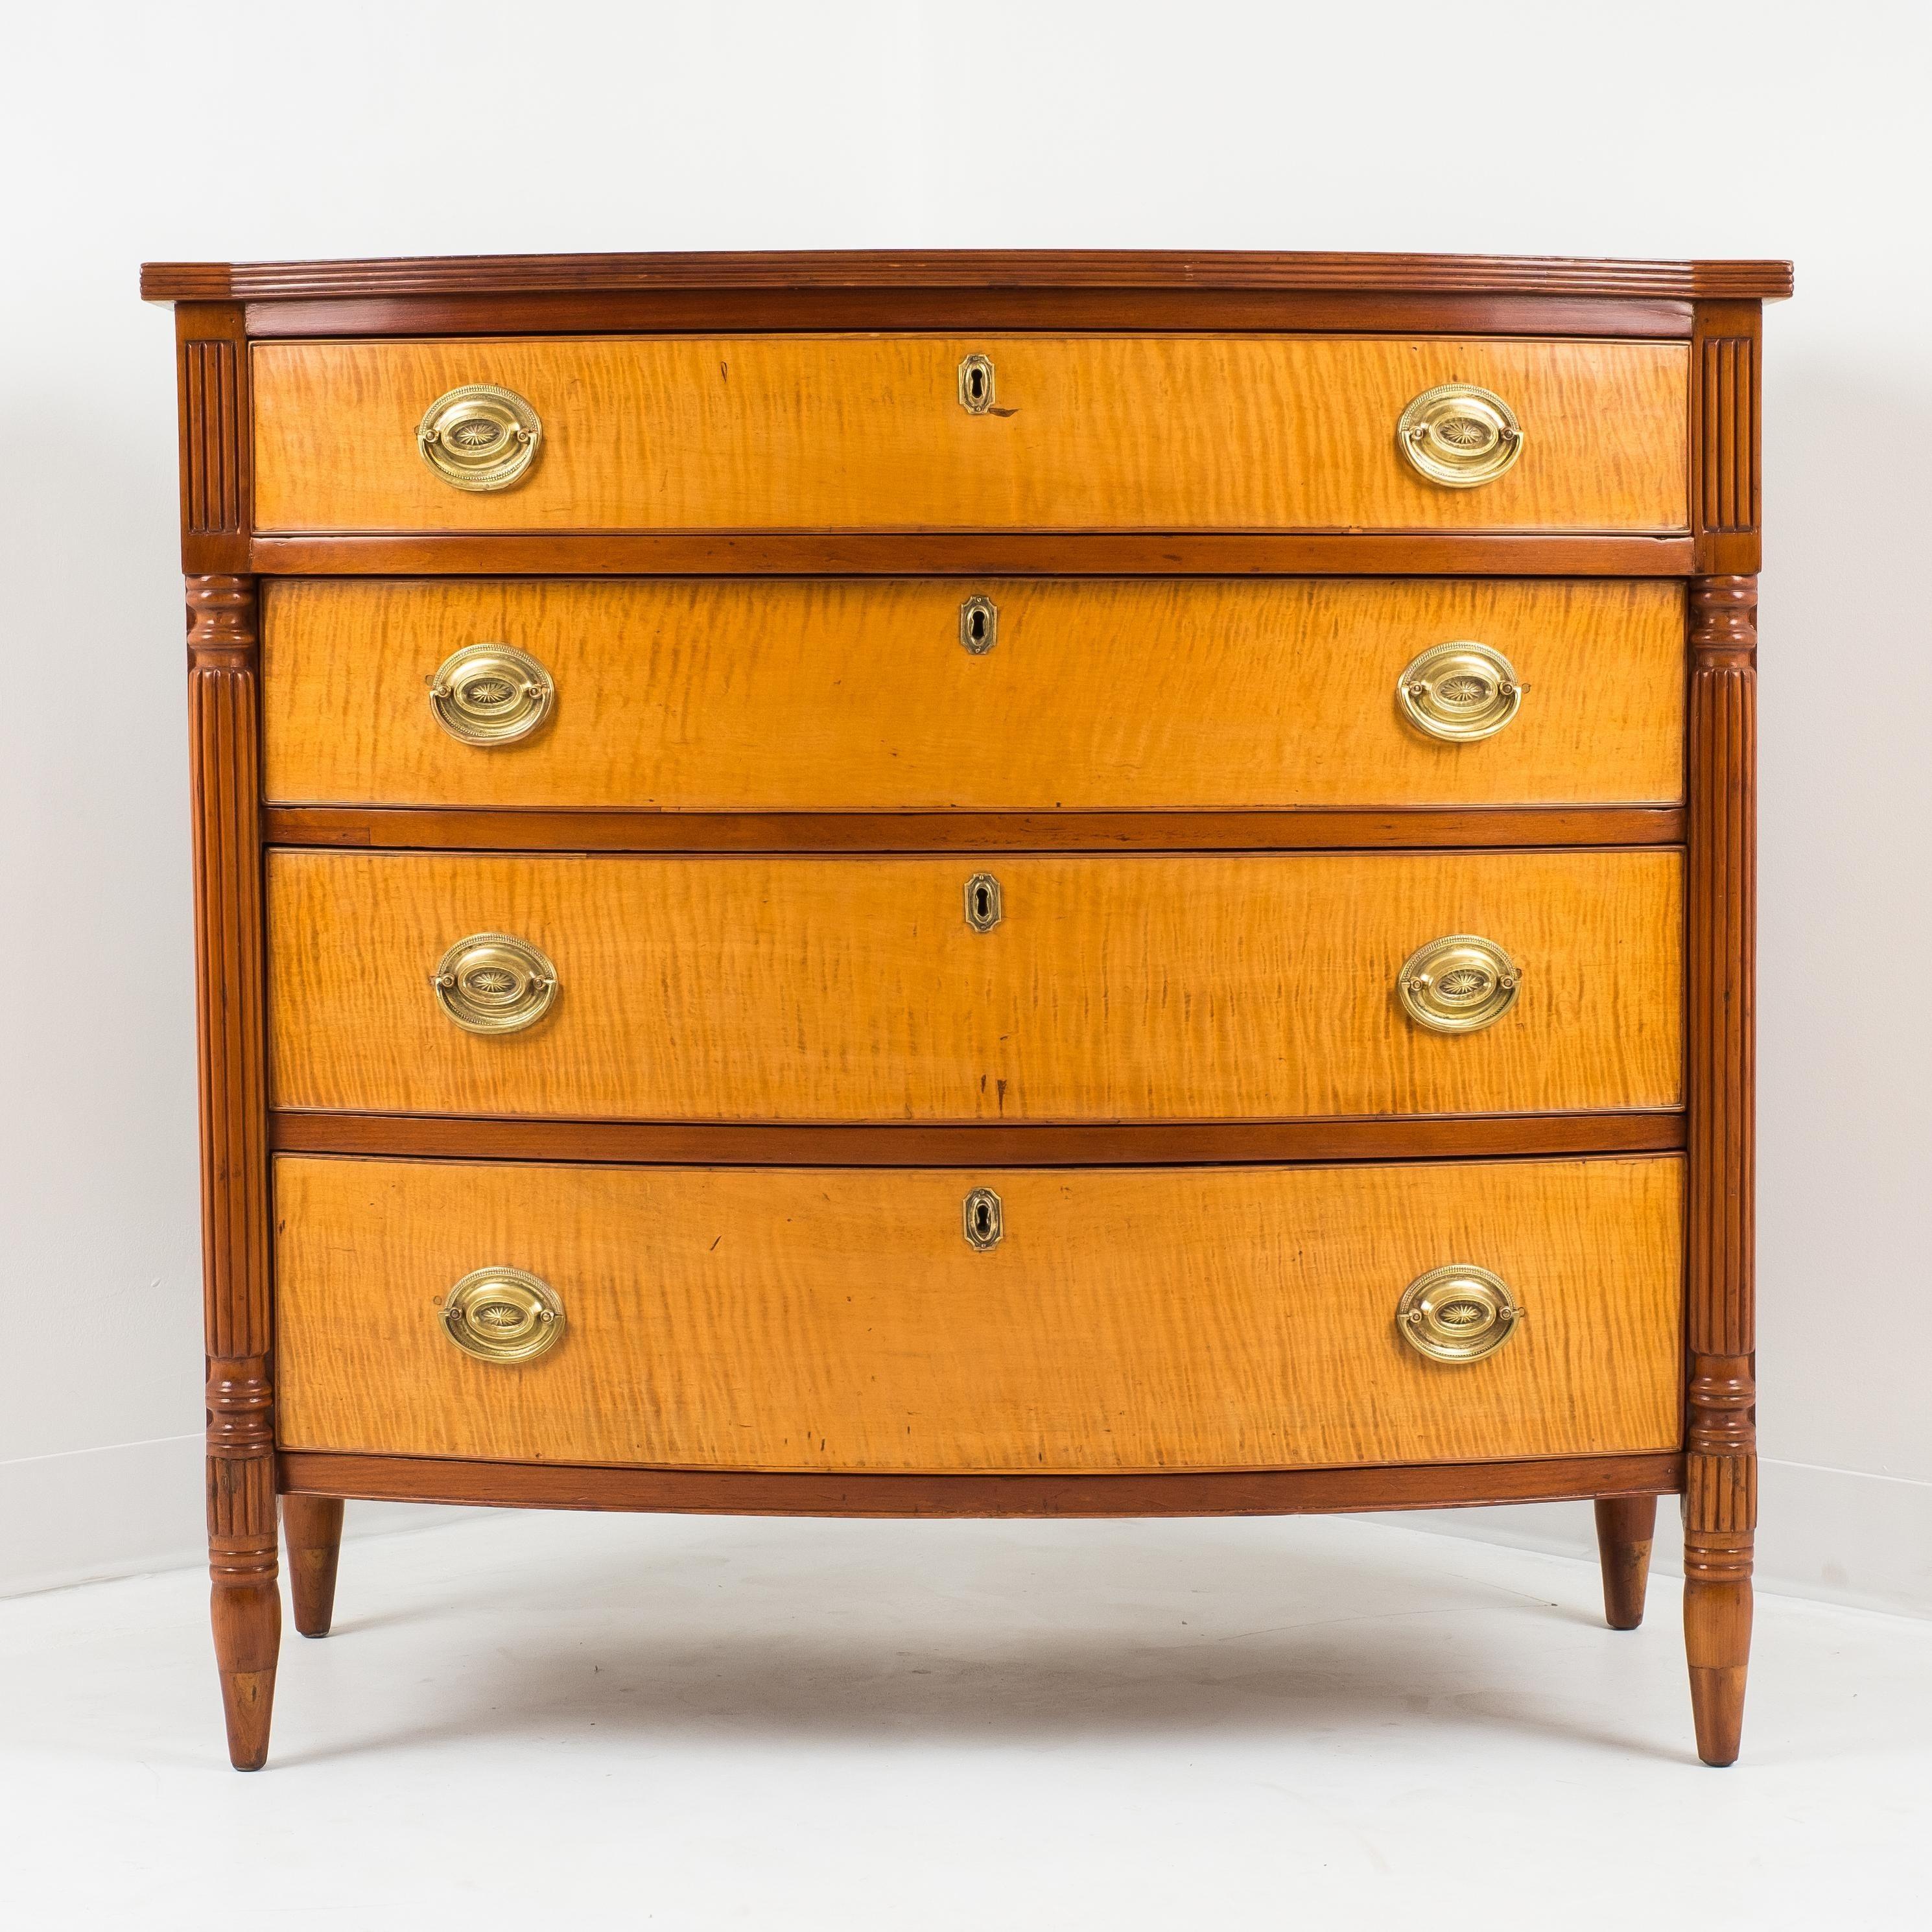 American Sheraton four drawer bow front chest with curly maple front and American cherry case. The graduated drawers, with projecting top drawer, are flanked by reeded pilasters which resolve into turned legs. Northern white pine secondary